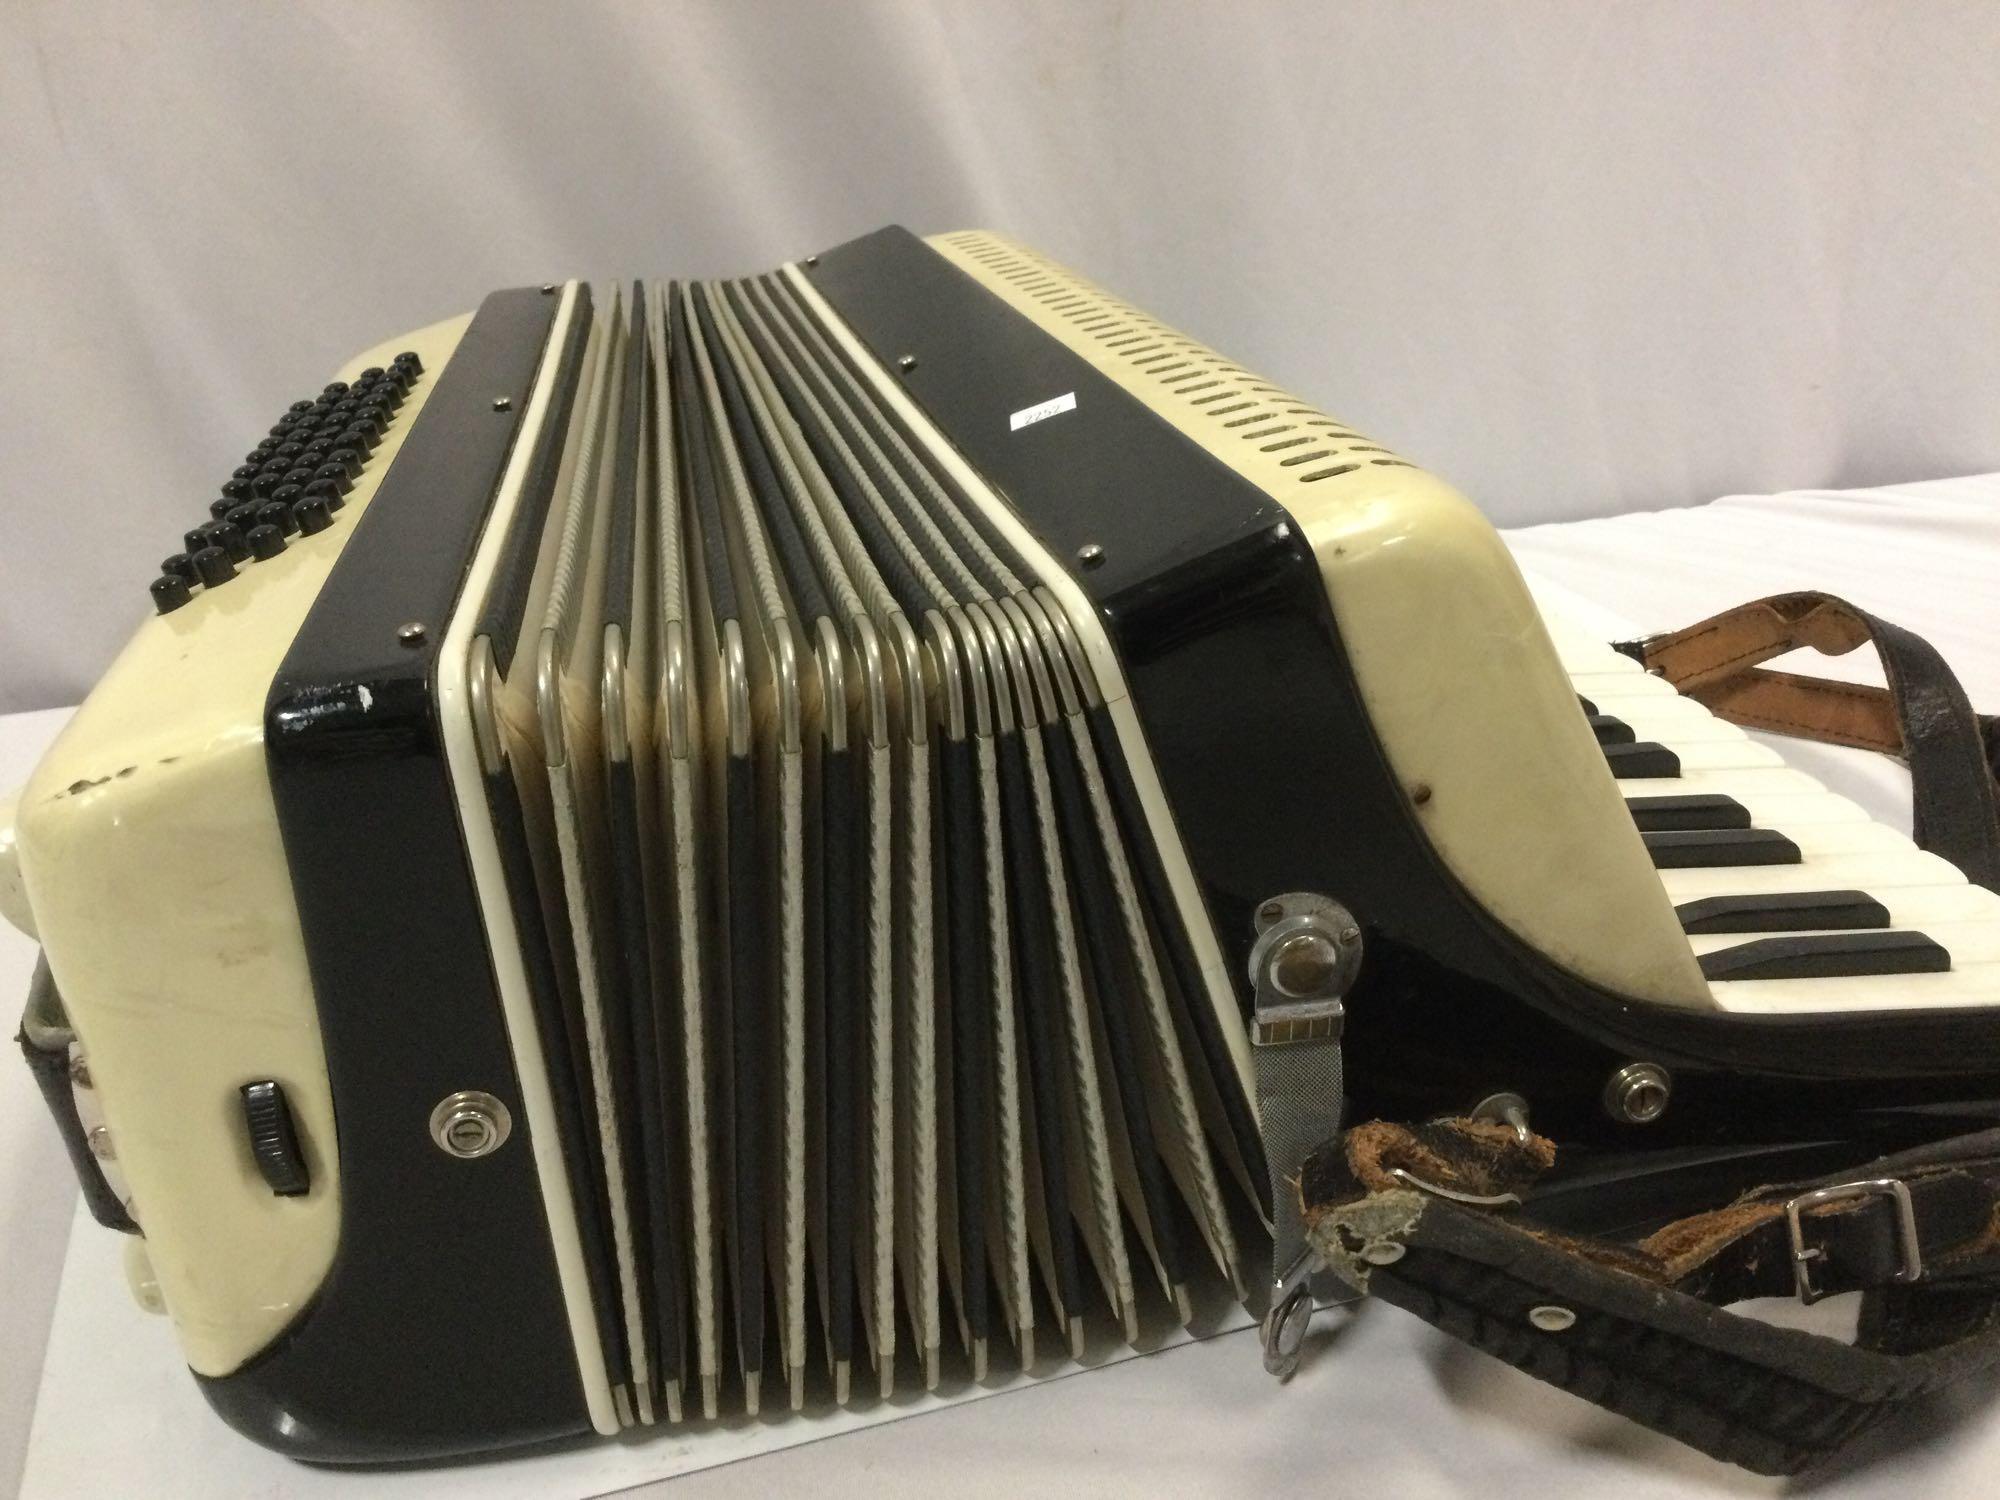 Antique CORTINI accordion w/ leather strap, made in Italy